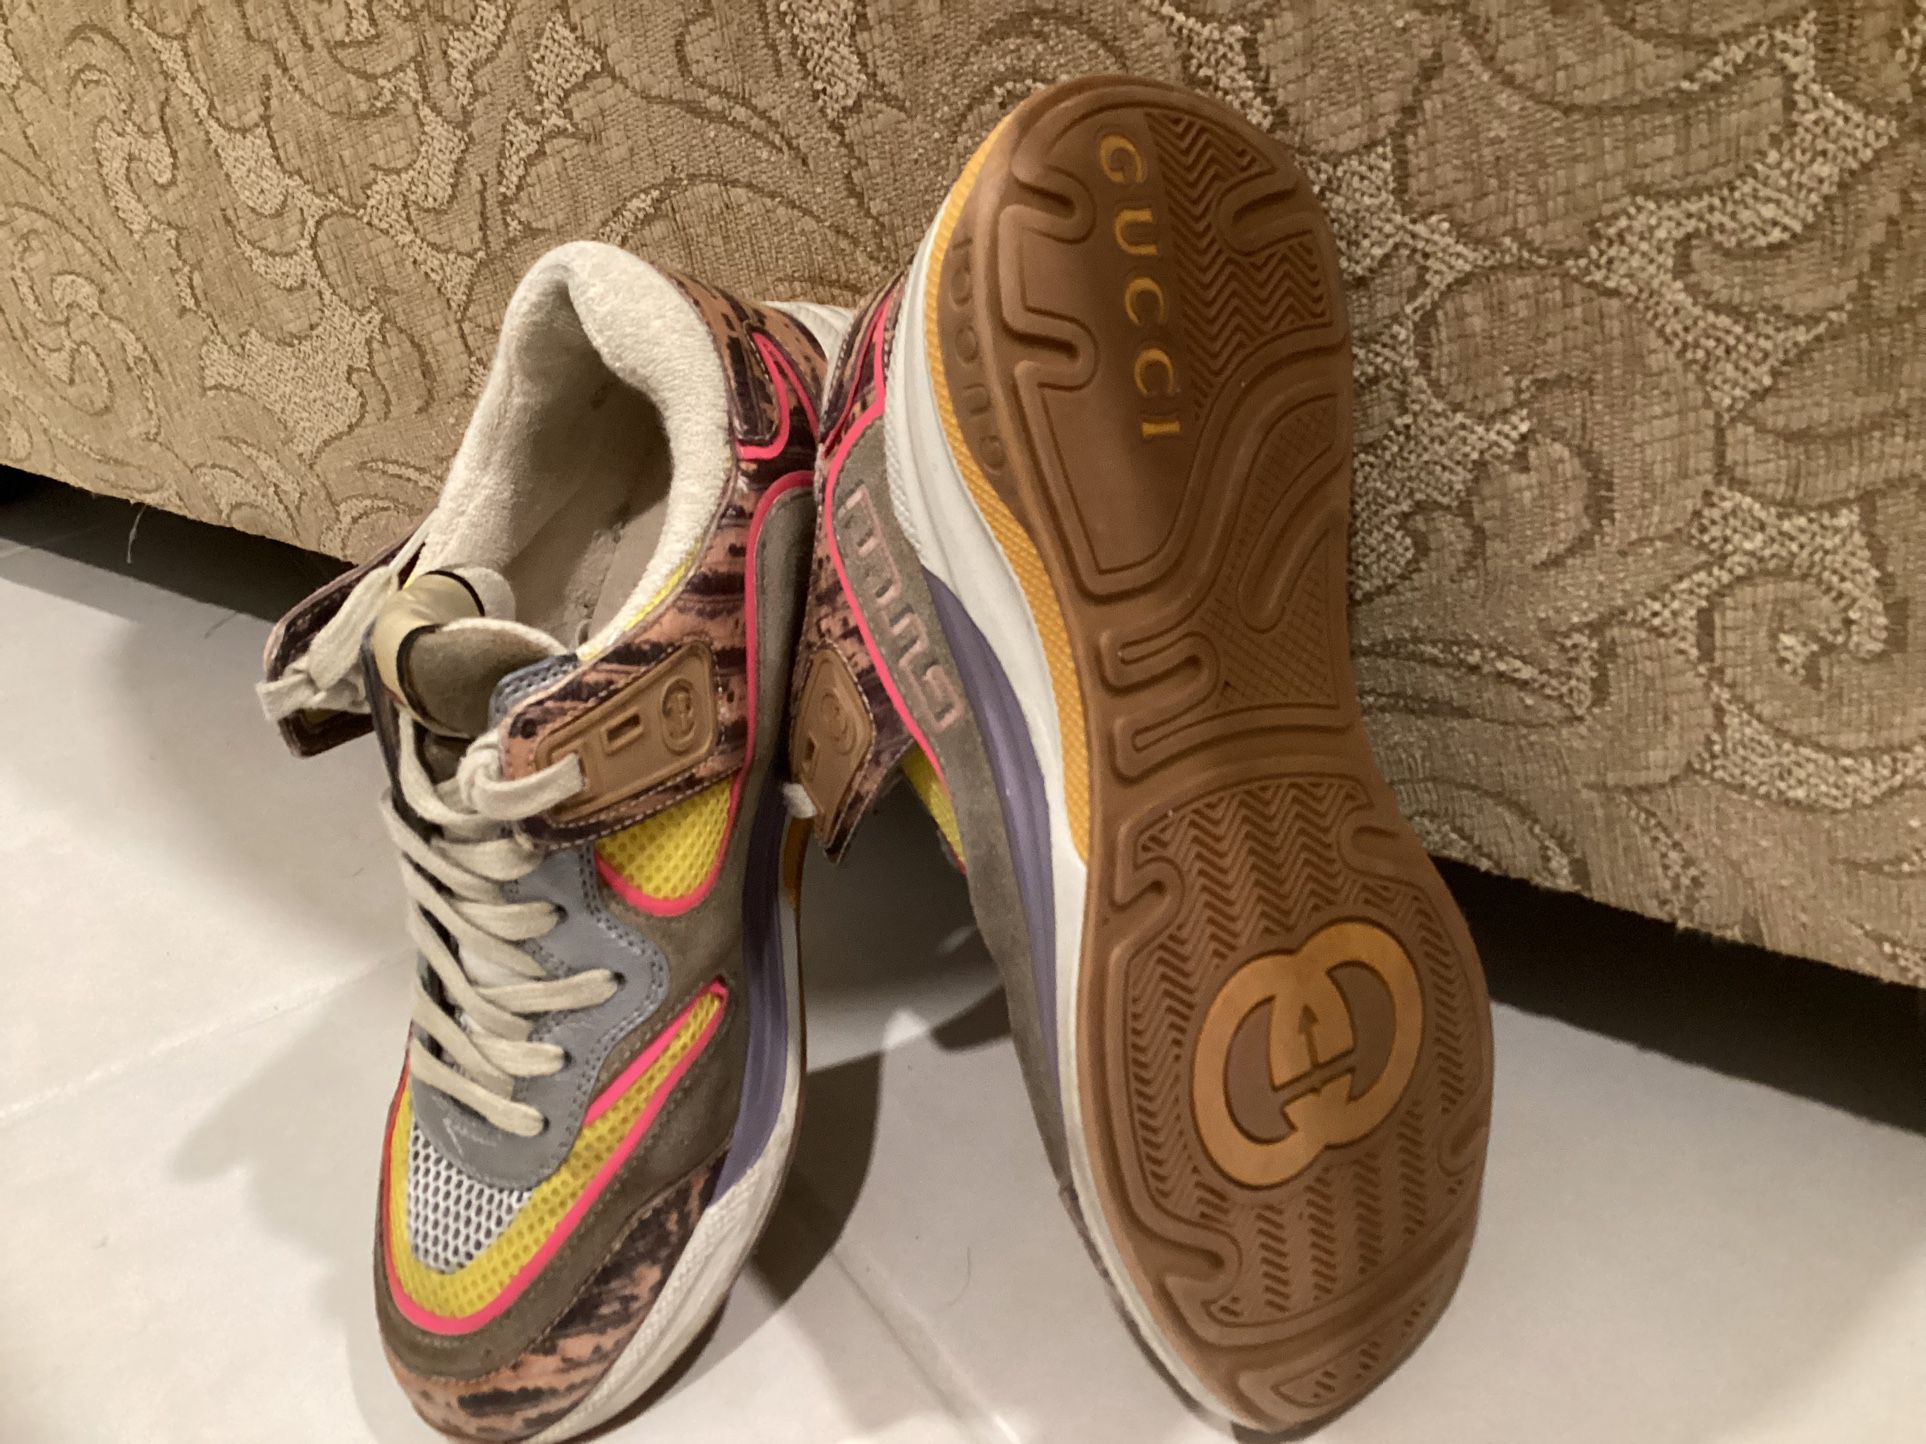 GG Multicolor Sneakers In Good Condition Size 39 Ladies Asking $180. Obo 